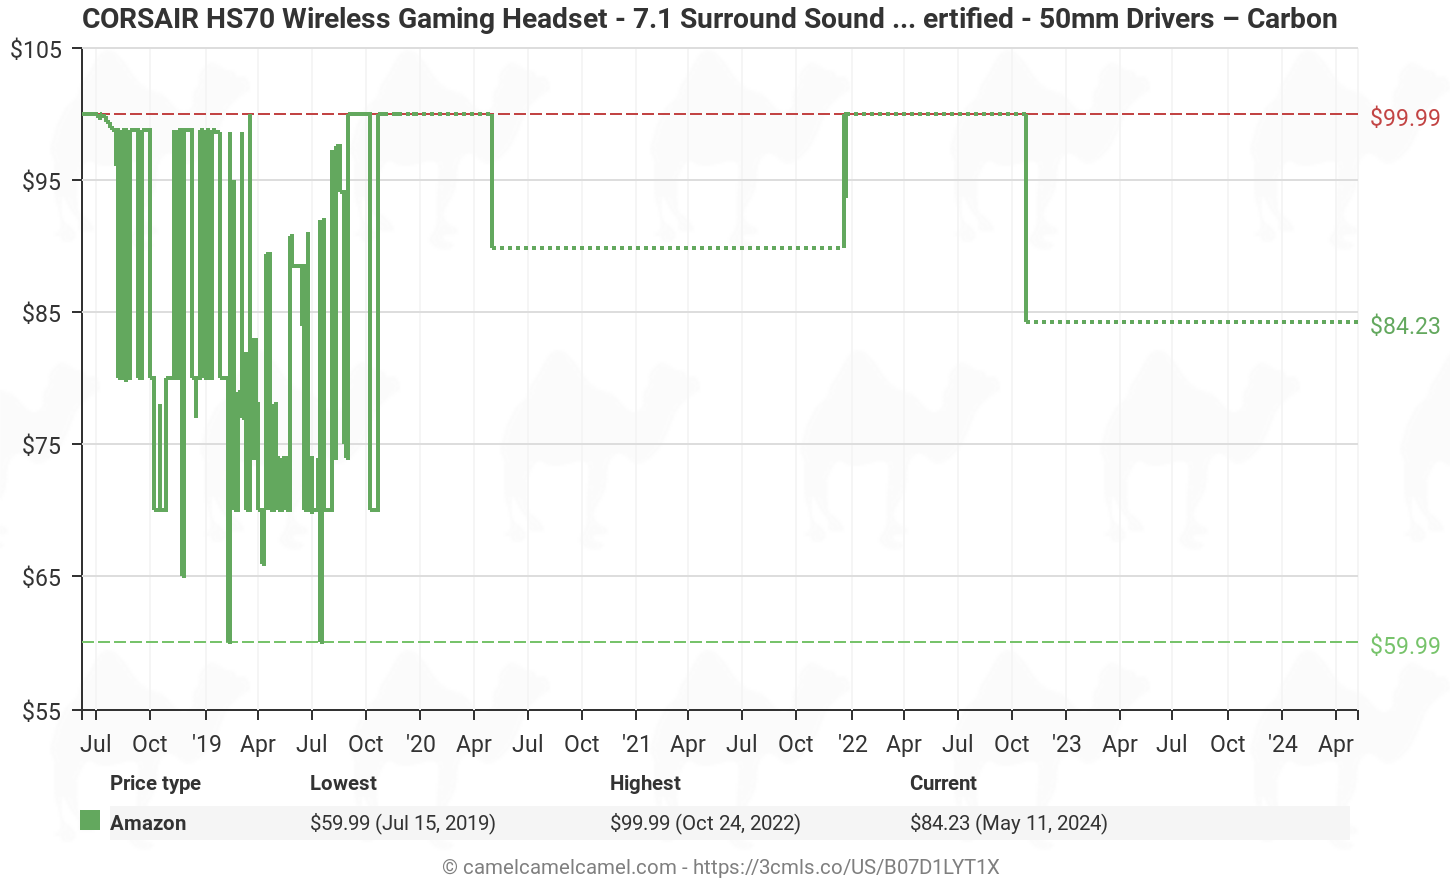 Amazon price history chart for CORSAIR HS70 Wireless Gaming Headset - 7.1 Surround Sound Headphones for PC - Discord Certified - 50mm Drivers â Carbon (B07D1LYT1X)